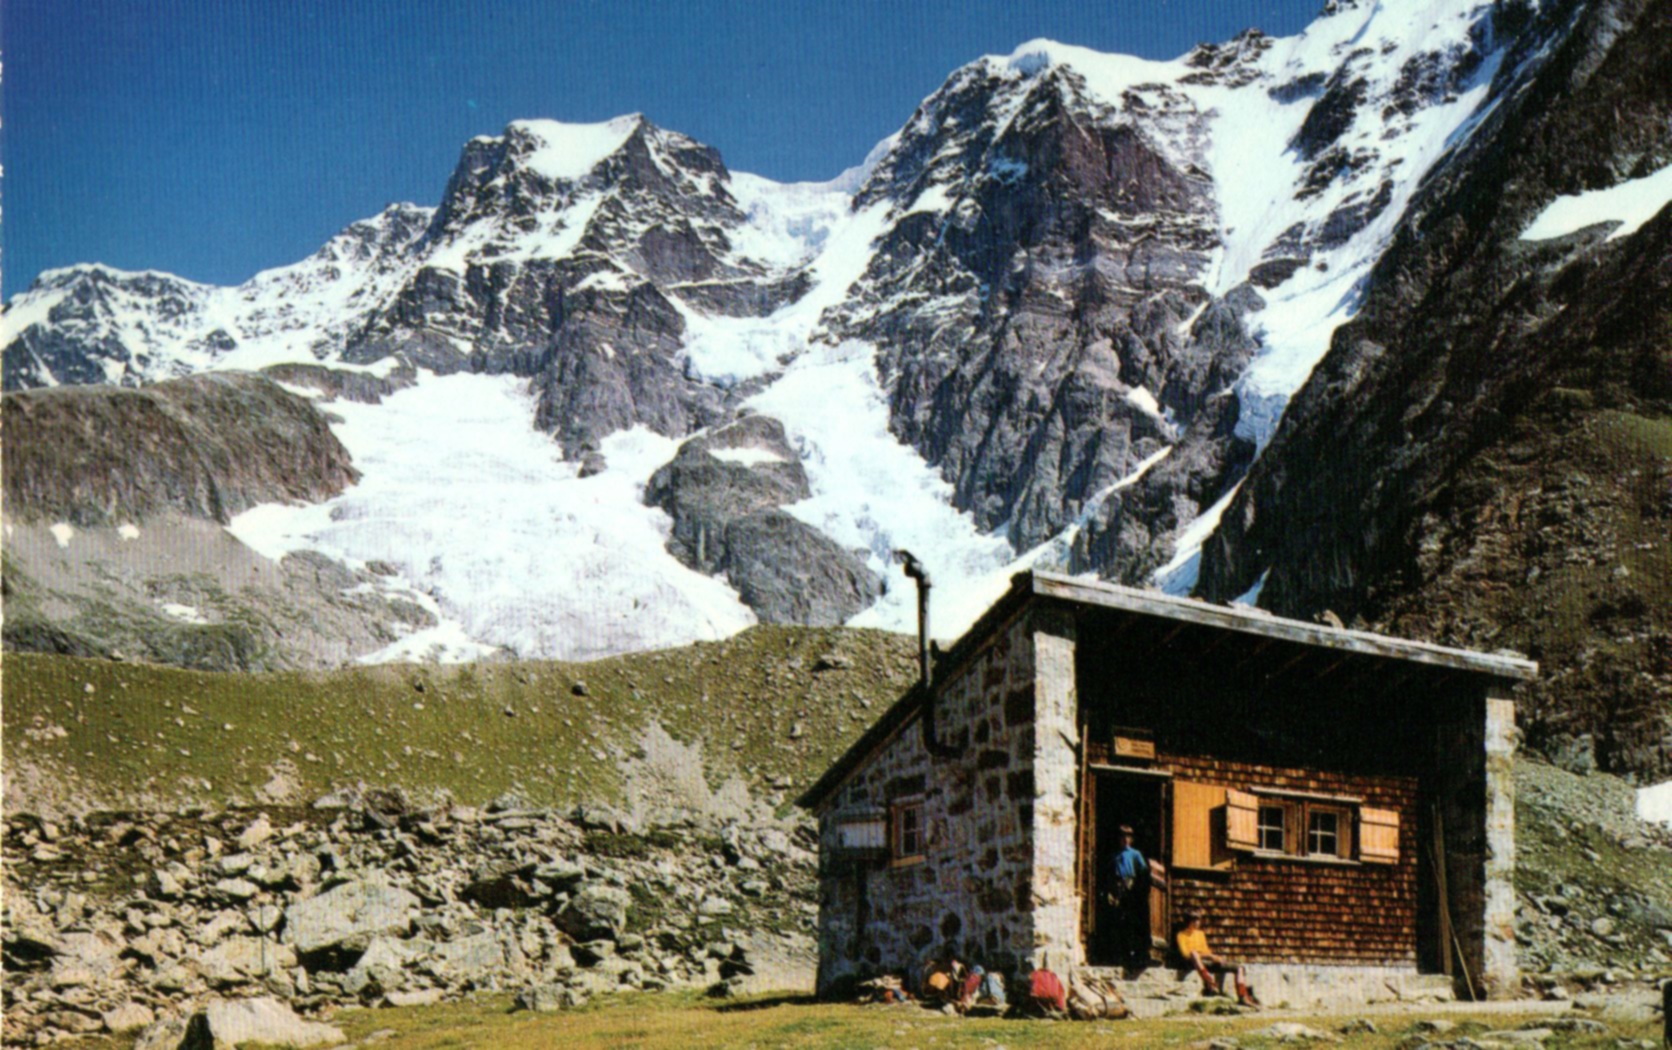 Mittaghorn from Schmadri Hut in the Bernese Oberlands Region of the Swiss Alps